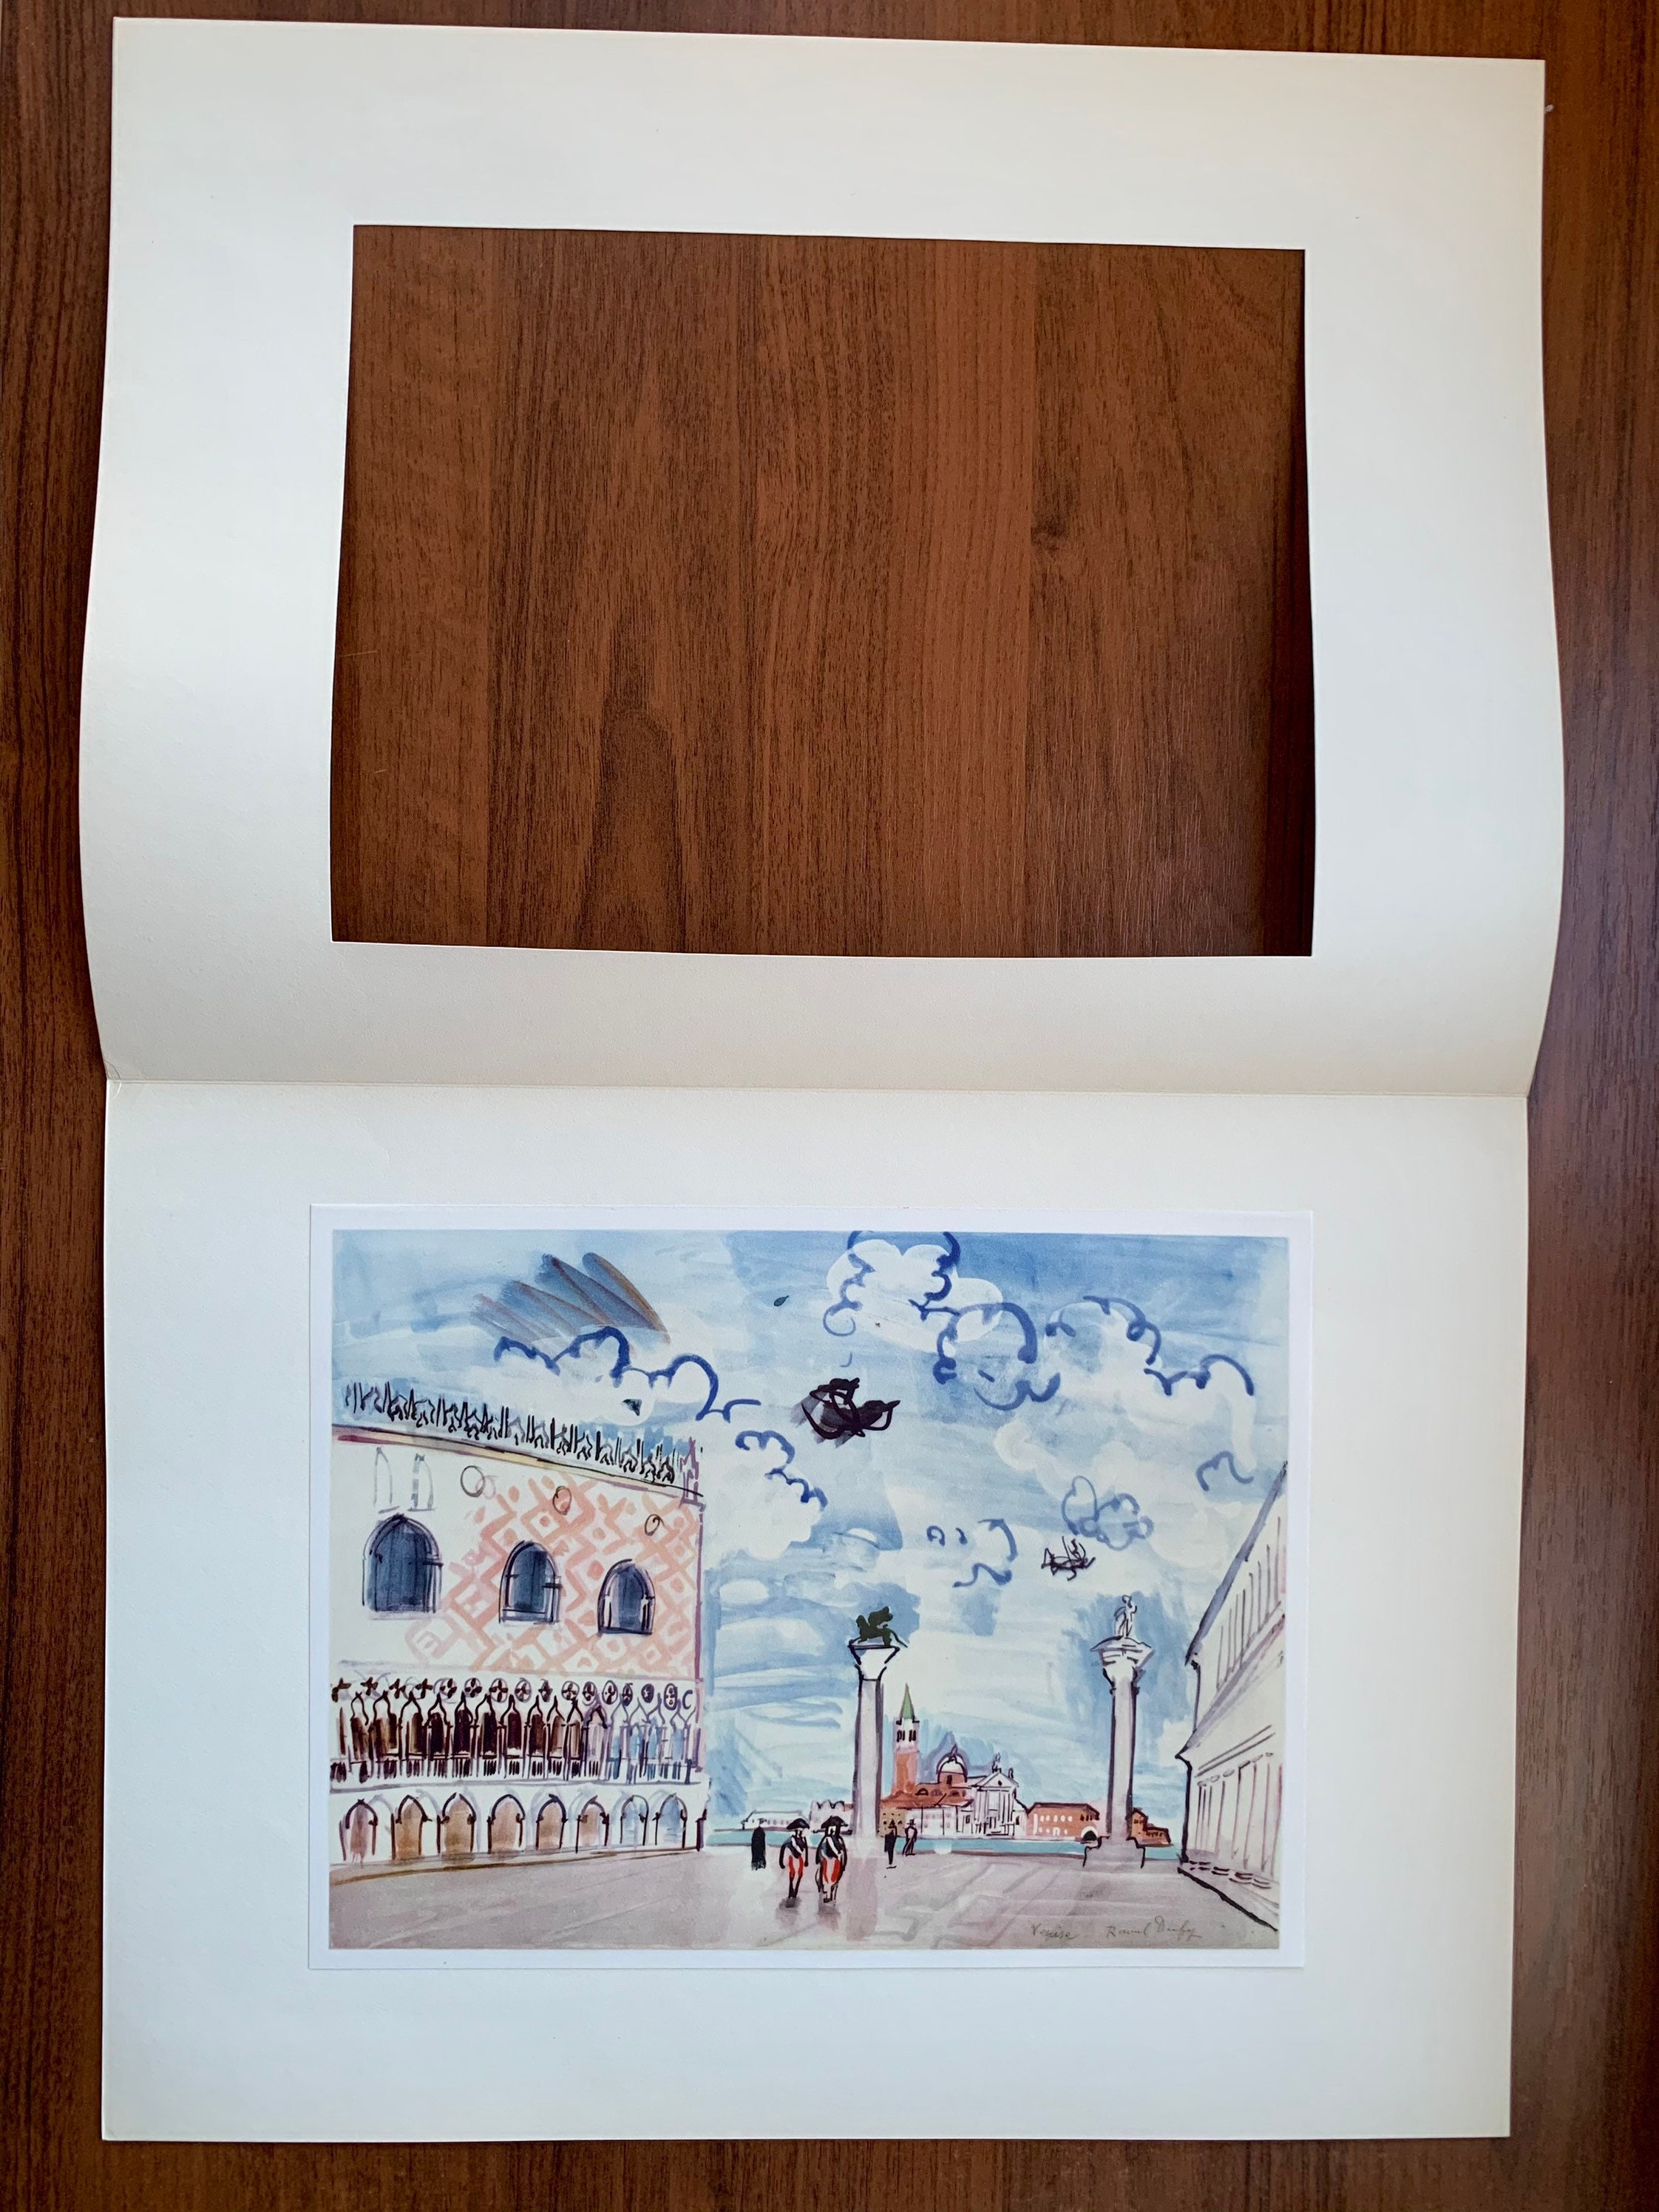 1959 Raoul Dufy LITHOGRAPHCollotype LIMITED Edition Large size Signed RARE  Aquarelle Collectible - Etsy 日本